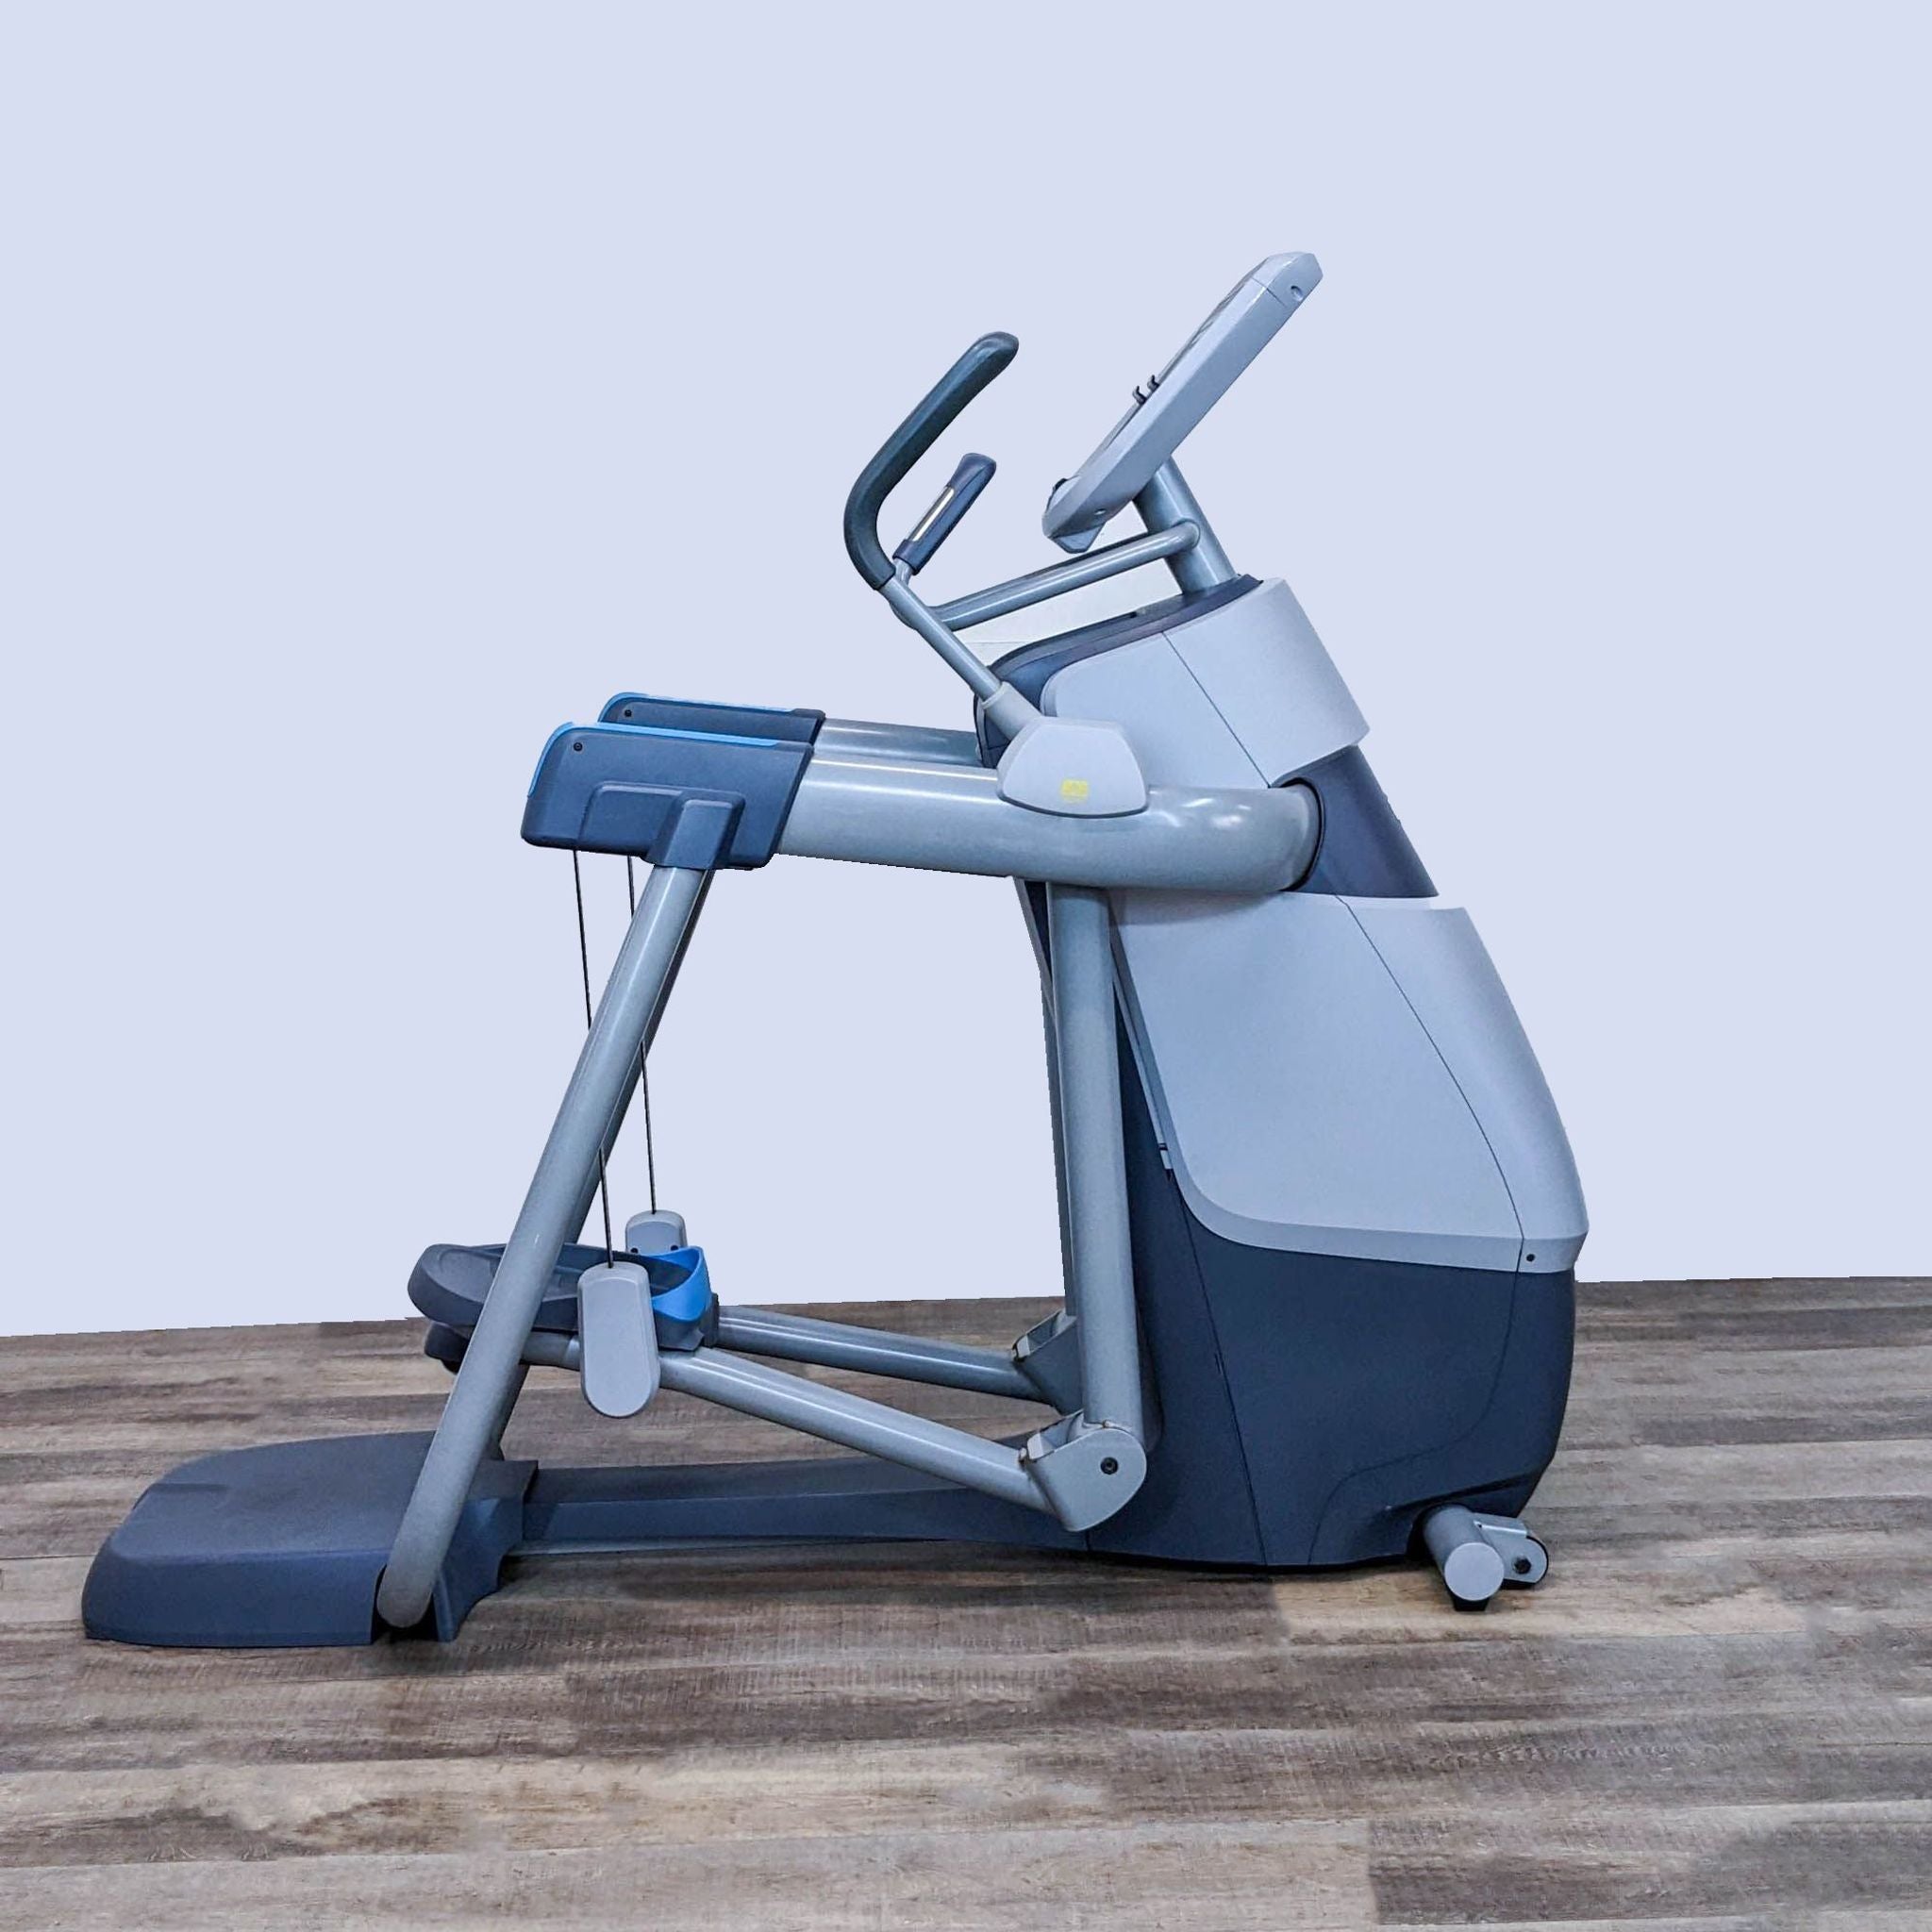 Rear view of a Precor elliptical machine showing the stride mechanism and wheels on a wooden floor.